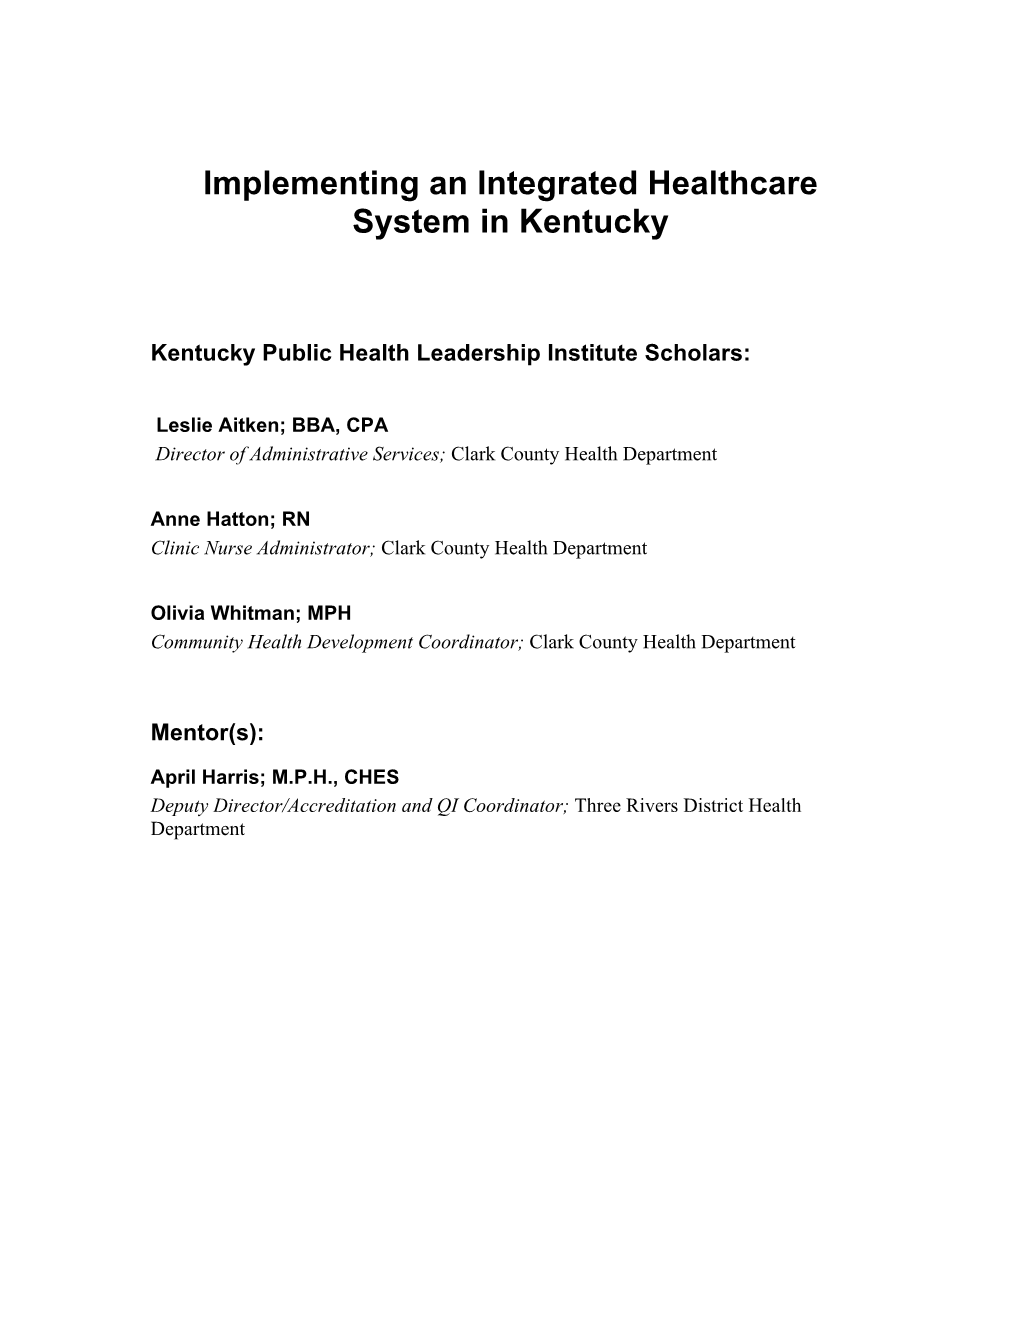 Implementing an Integrated Healthcare System in Kentucky